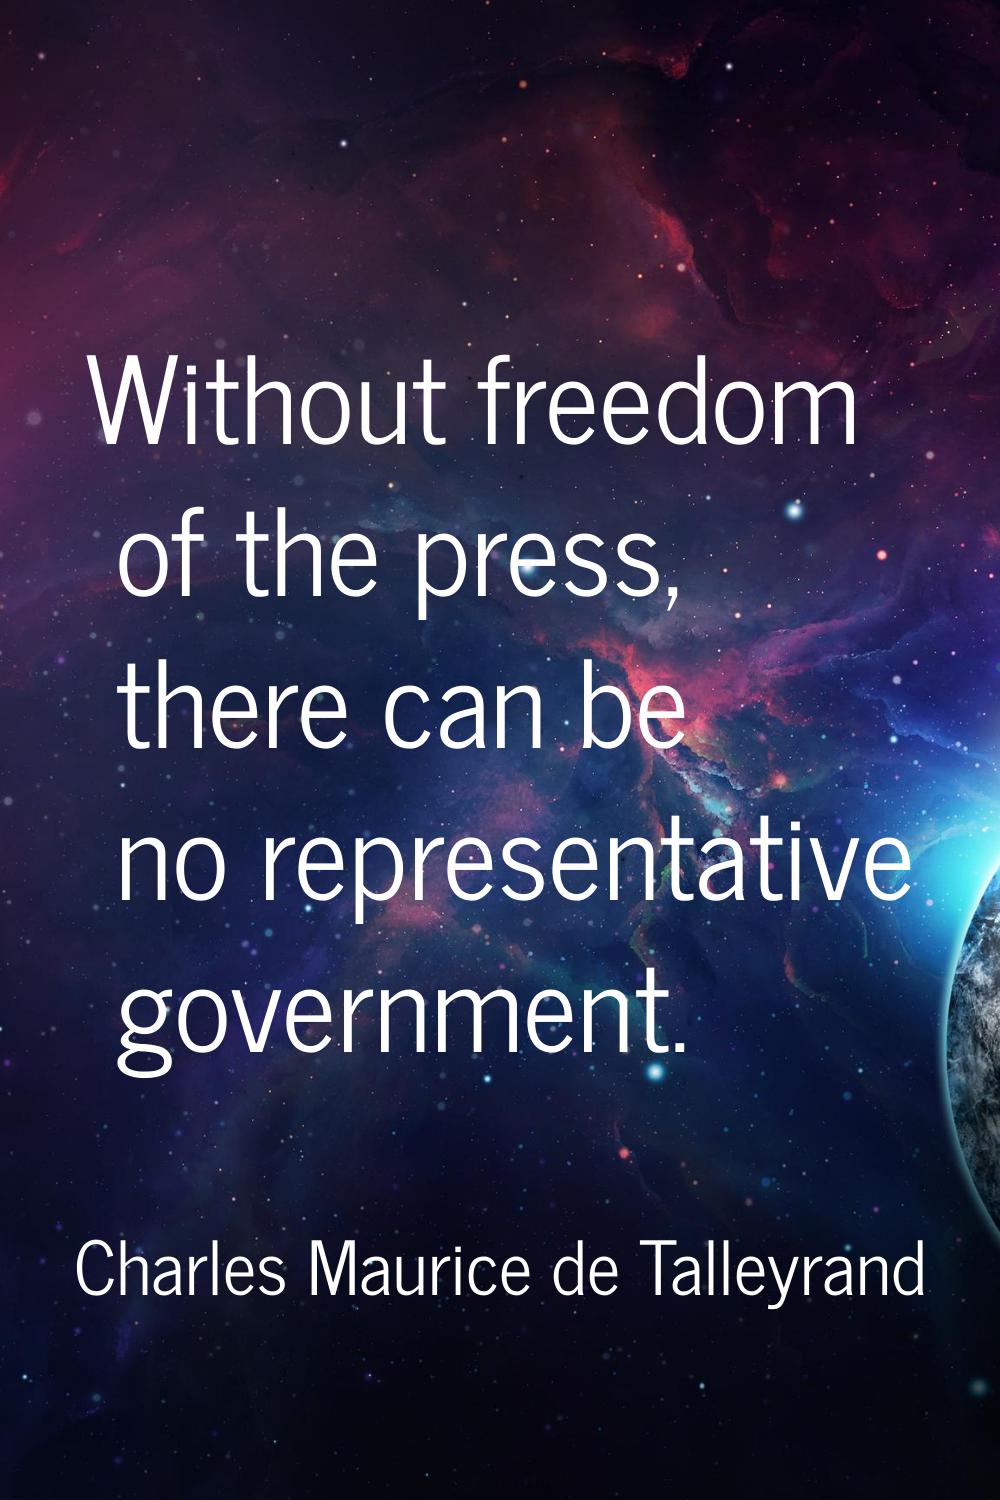 Without freedom of the press, there can be no representative government.